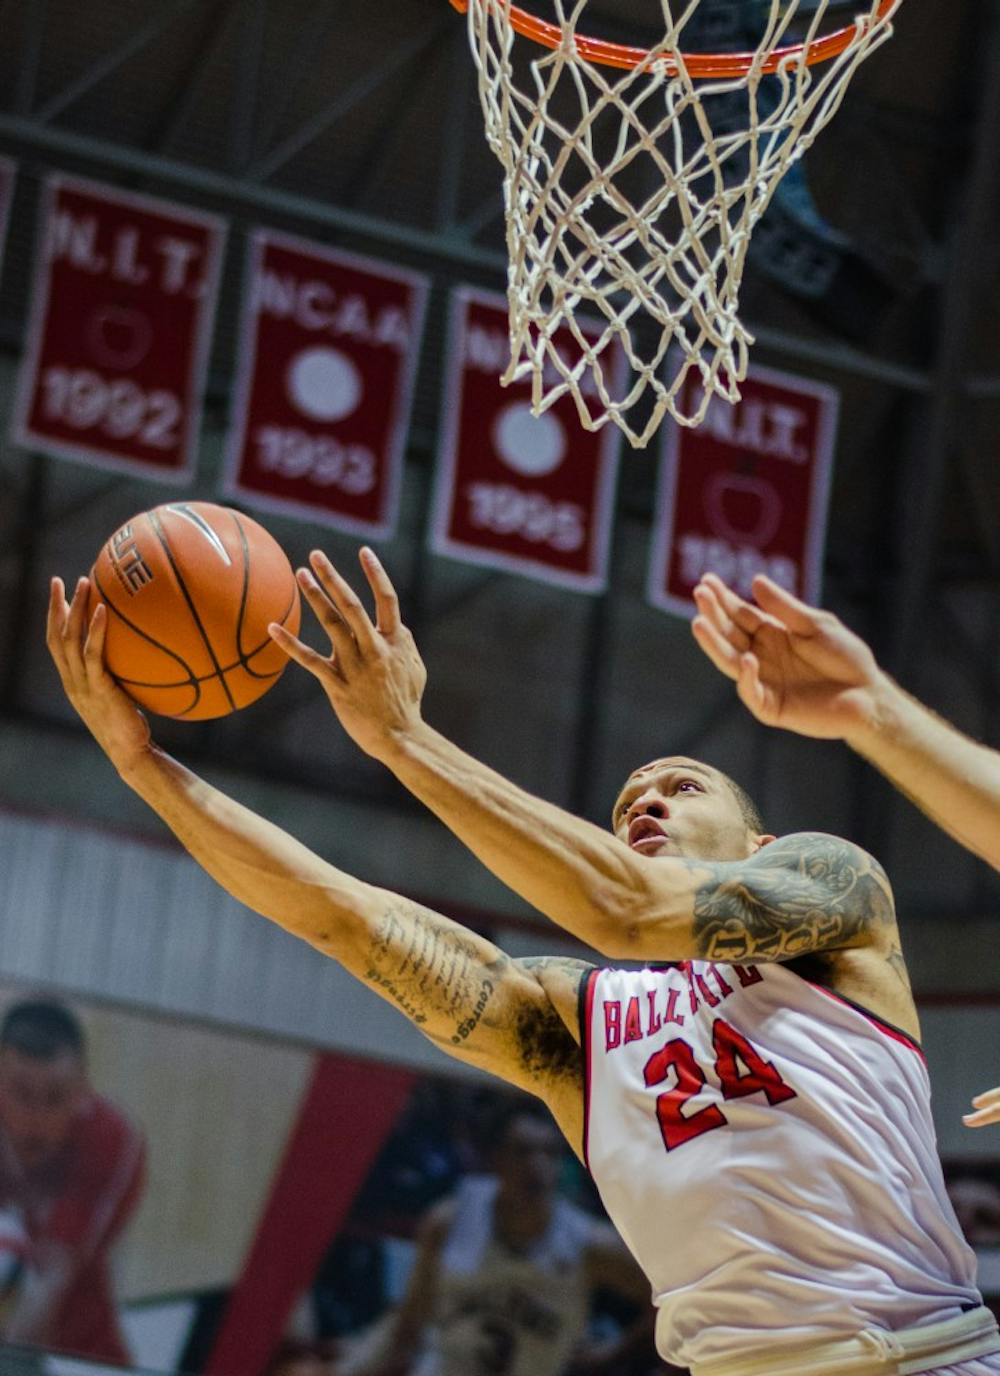 <p>Senior guard Jeremiah Davis started most of last season, however he has been developing a different role to provide better scoring and defense. The Ball State men's basketball team is 10-5 in their season and 1-1 in Mid-American Conference play. <em>DN PHOTO BREANNA DAUGHERTY</em></p>